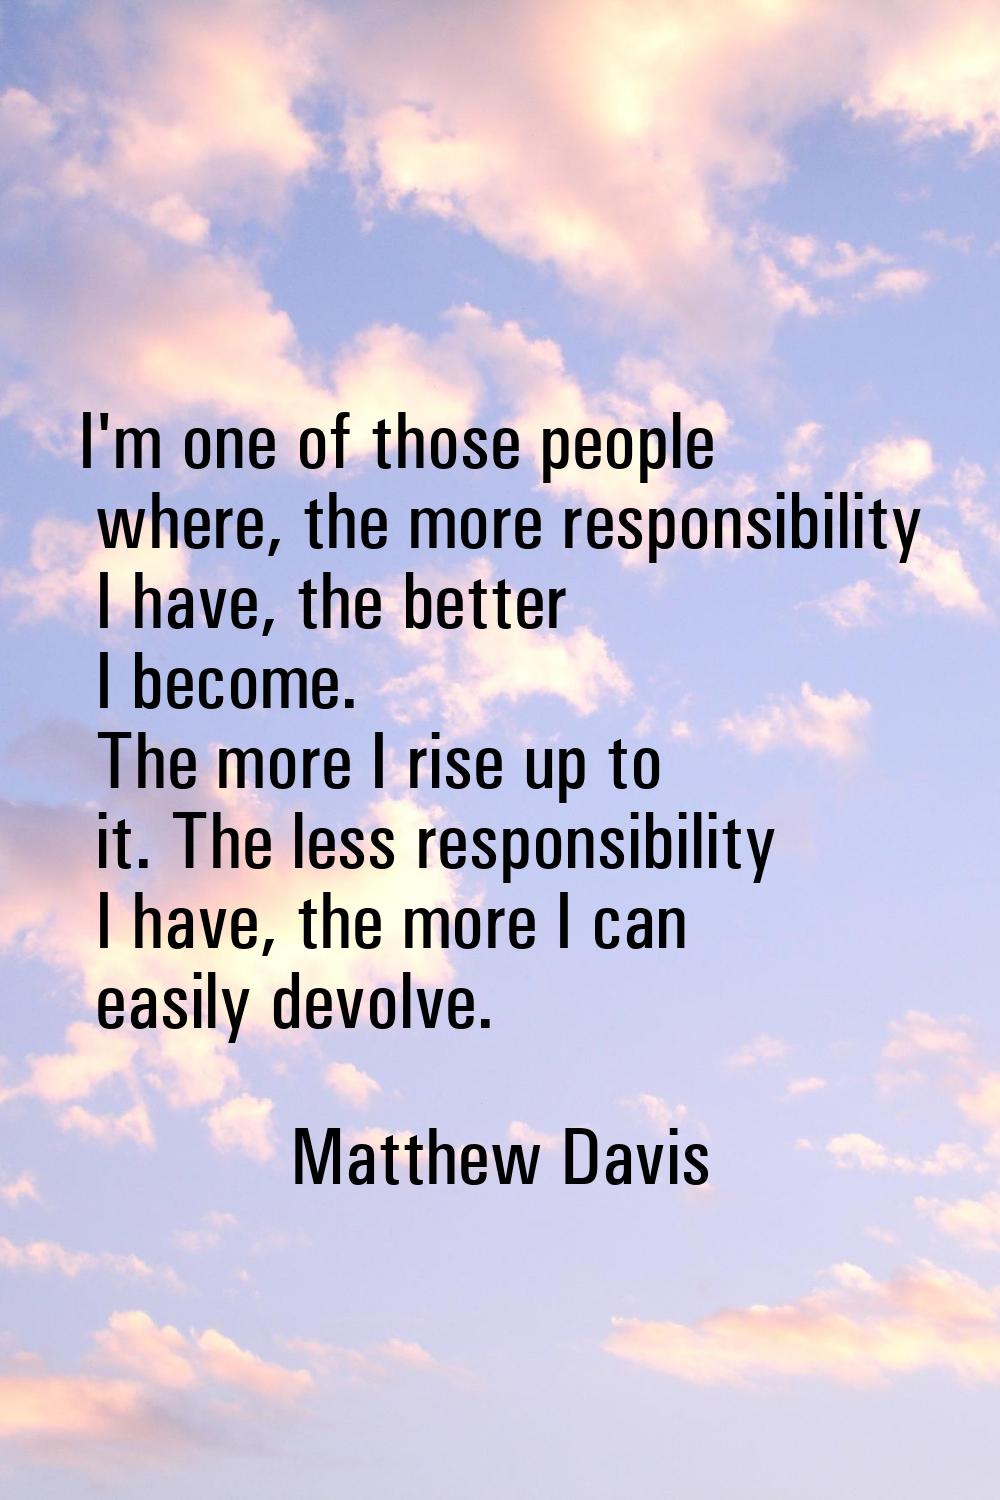 I'm one of those people where, the more responsibility I have, the better I become. The more I rise